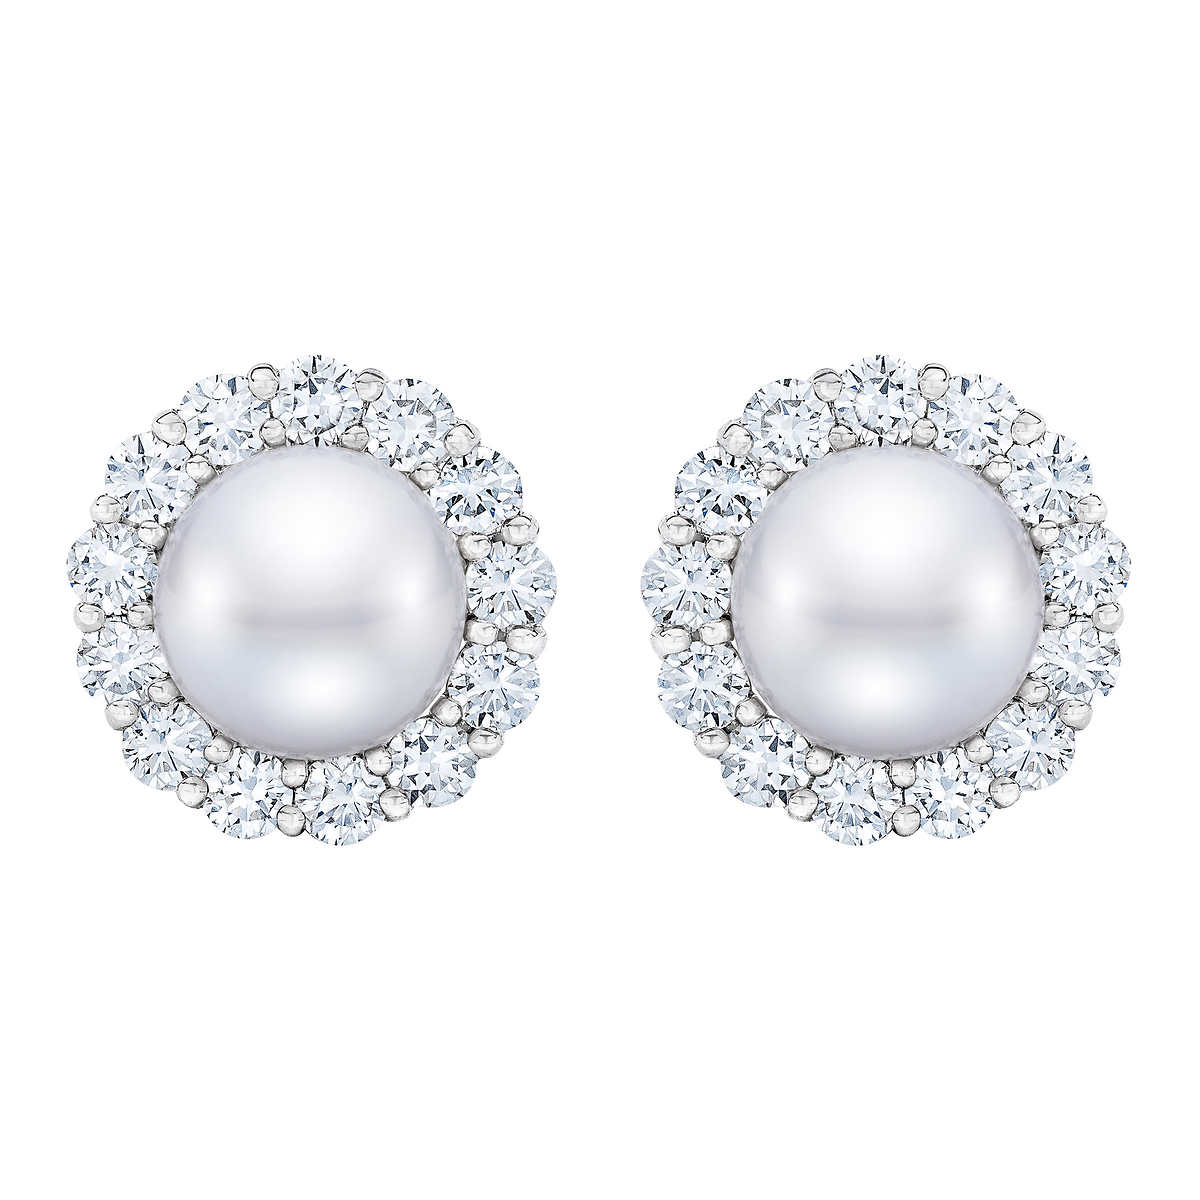 Handpicked AA Quality White Freshwater Cultured Pearls and Diamonds Earrings in 10K White Gold